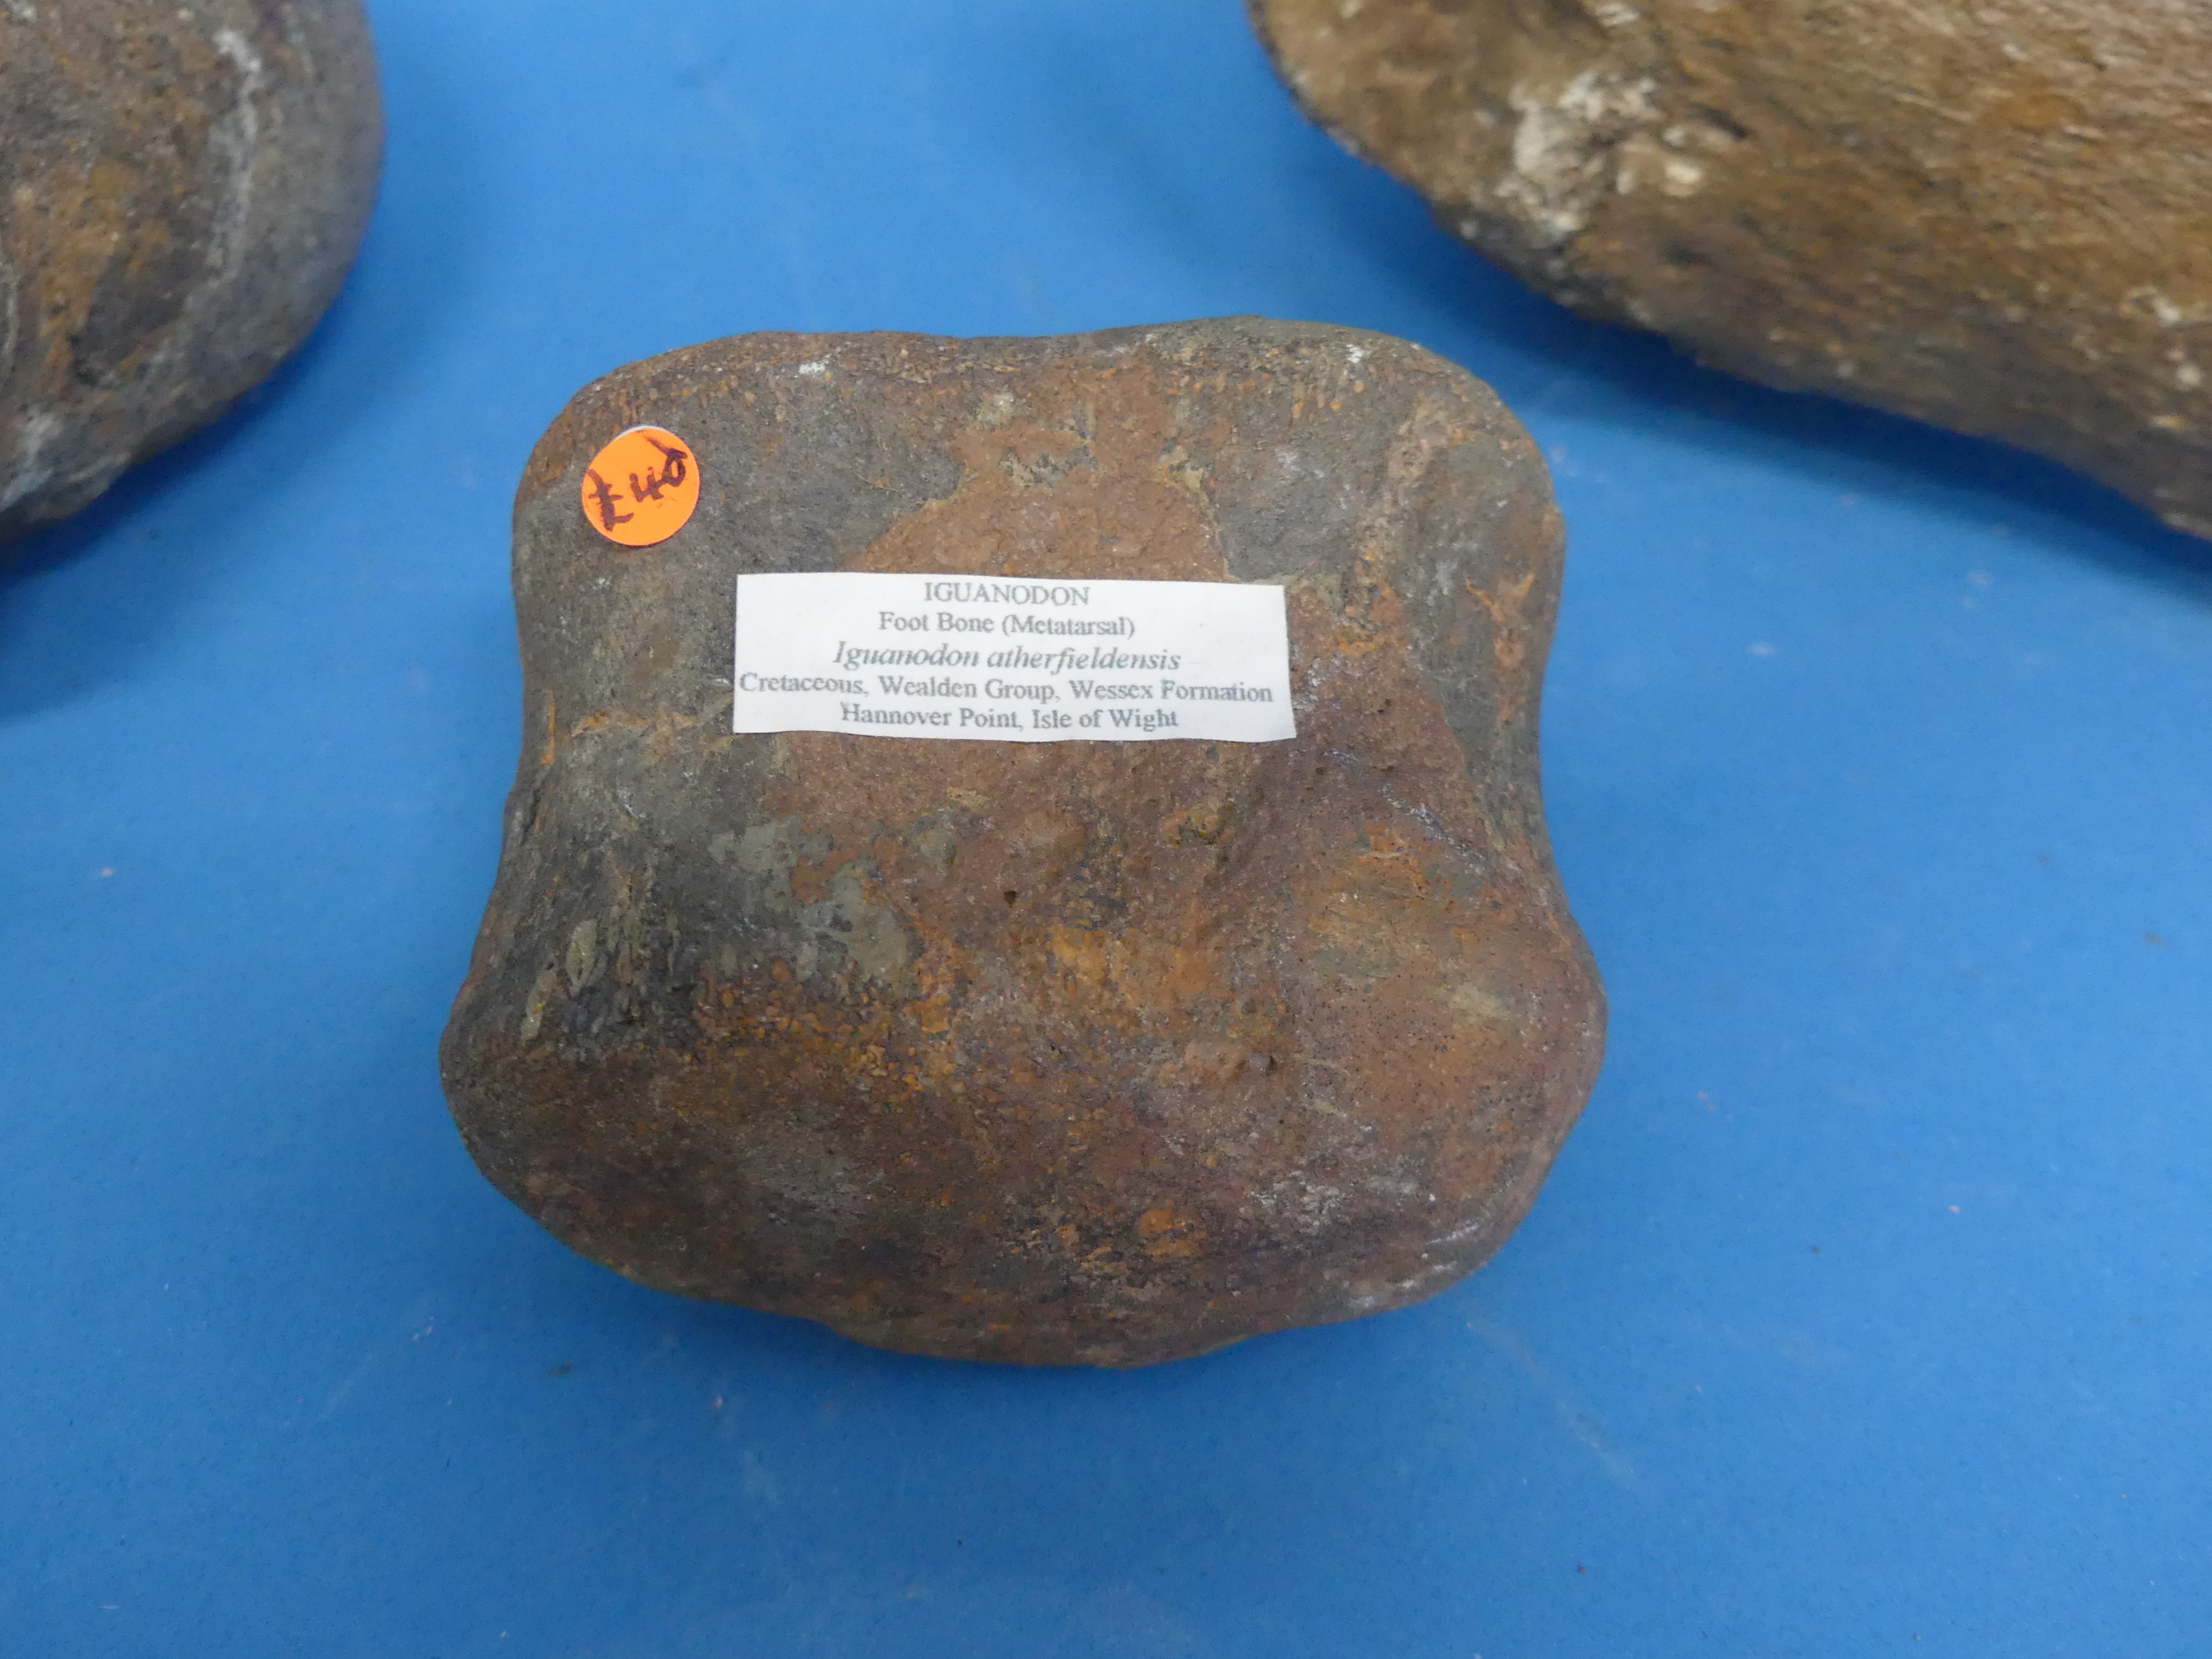 Natural History, Paleontology and Minerals; Two Iguanodon Bone Fossil Specimens, Cretaceous - Image 3 of 8